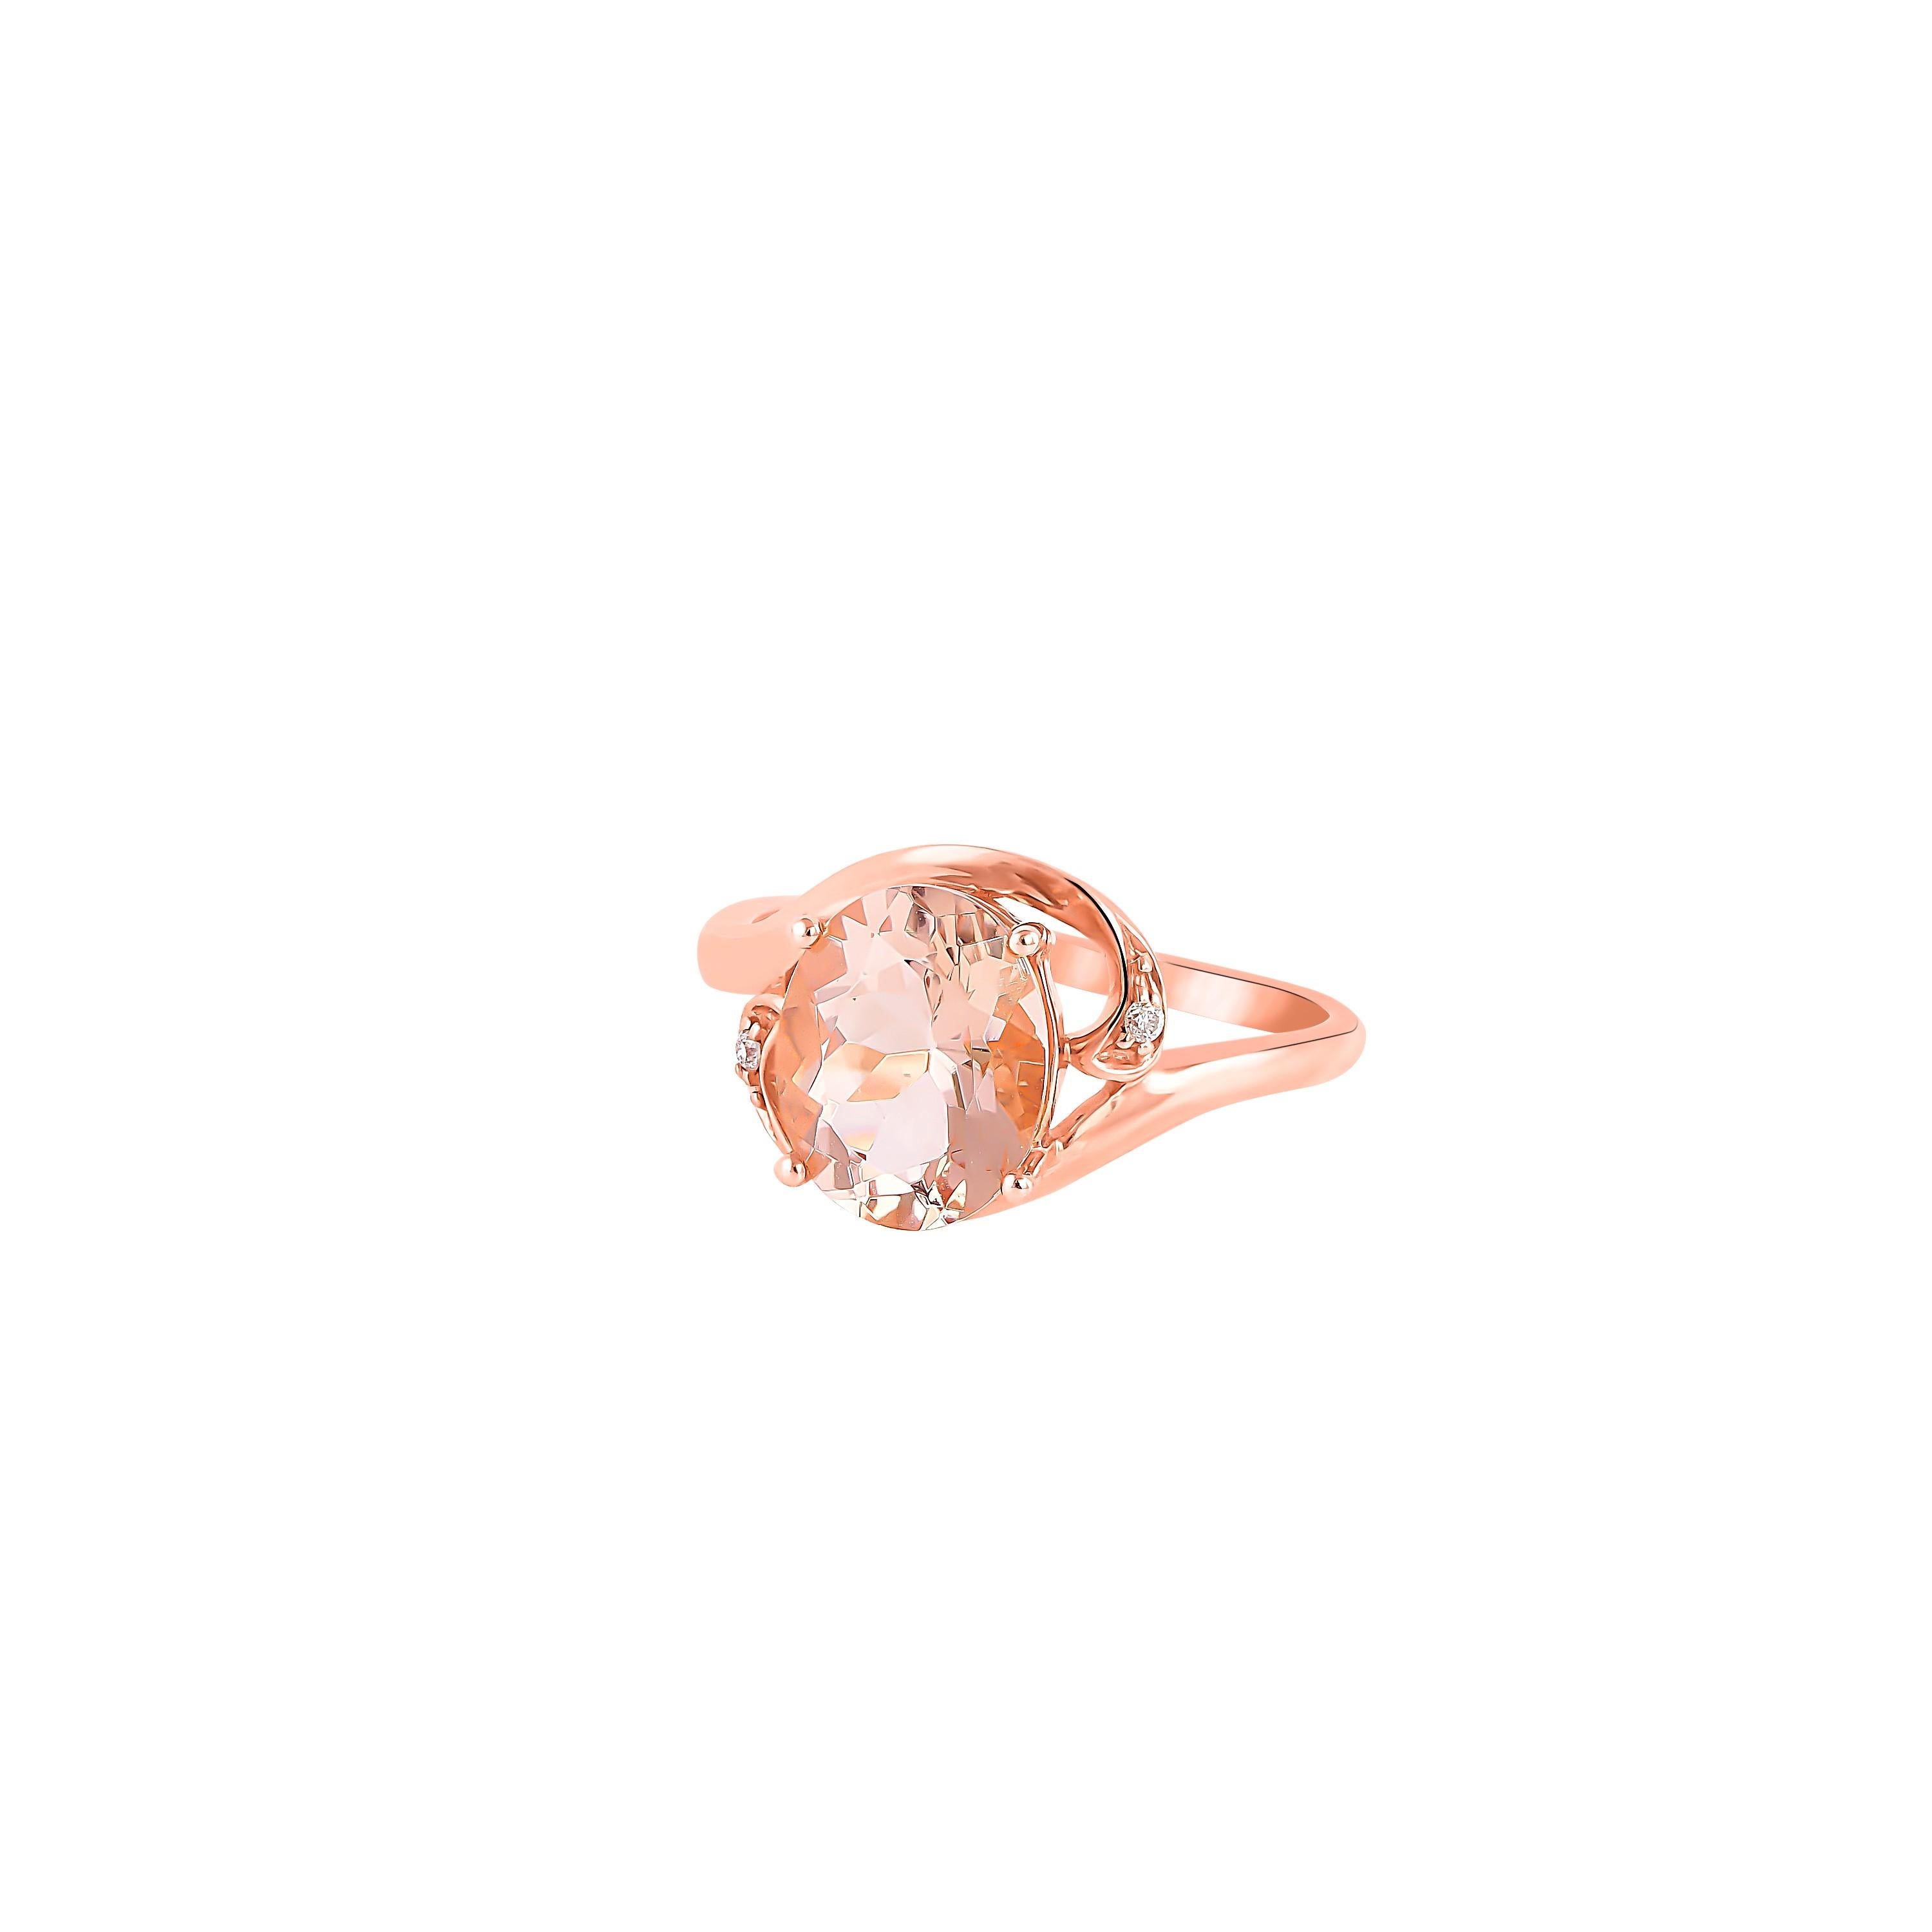 Oval Cut 2.42 Carat Morganite and Diamond Ring in 18 Karat Rose Gold For Sale